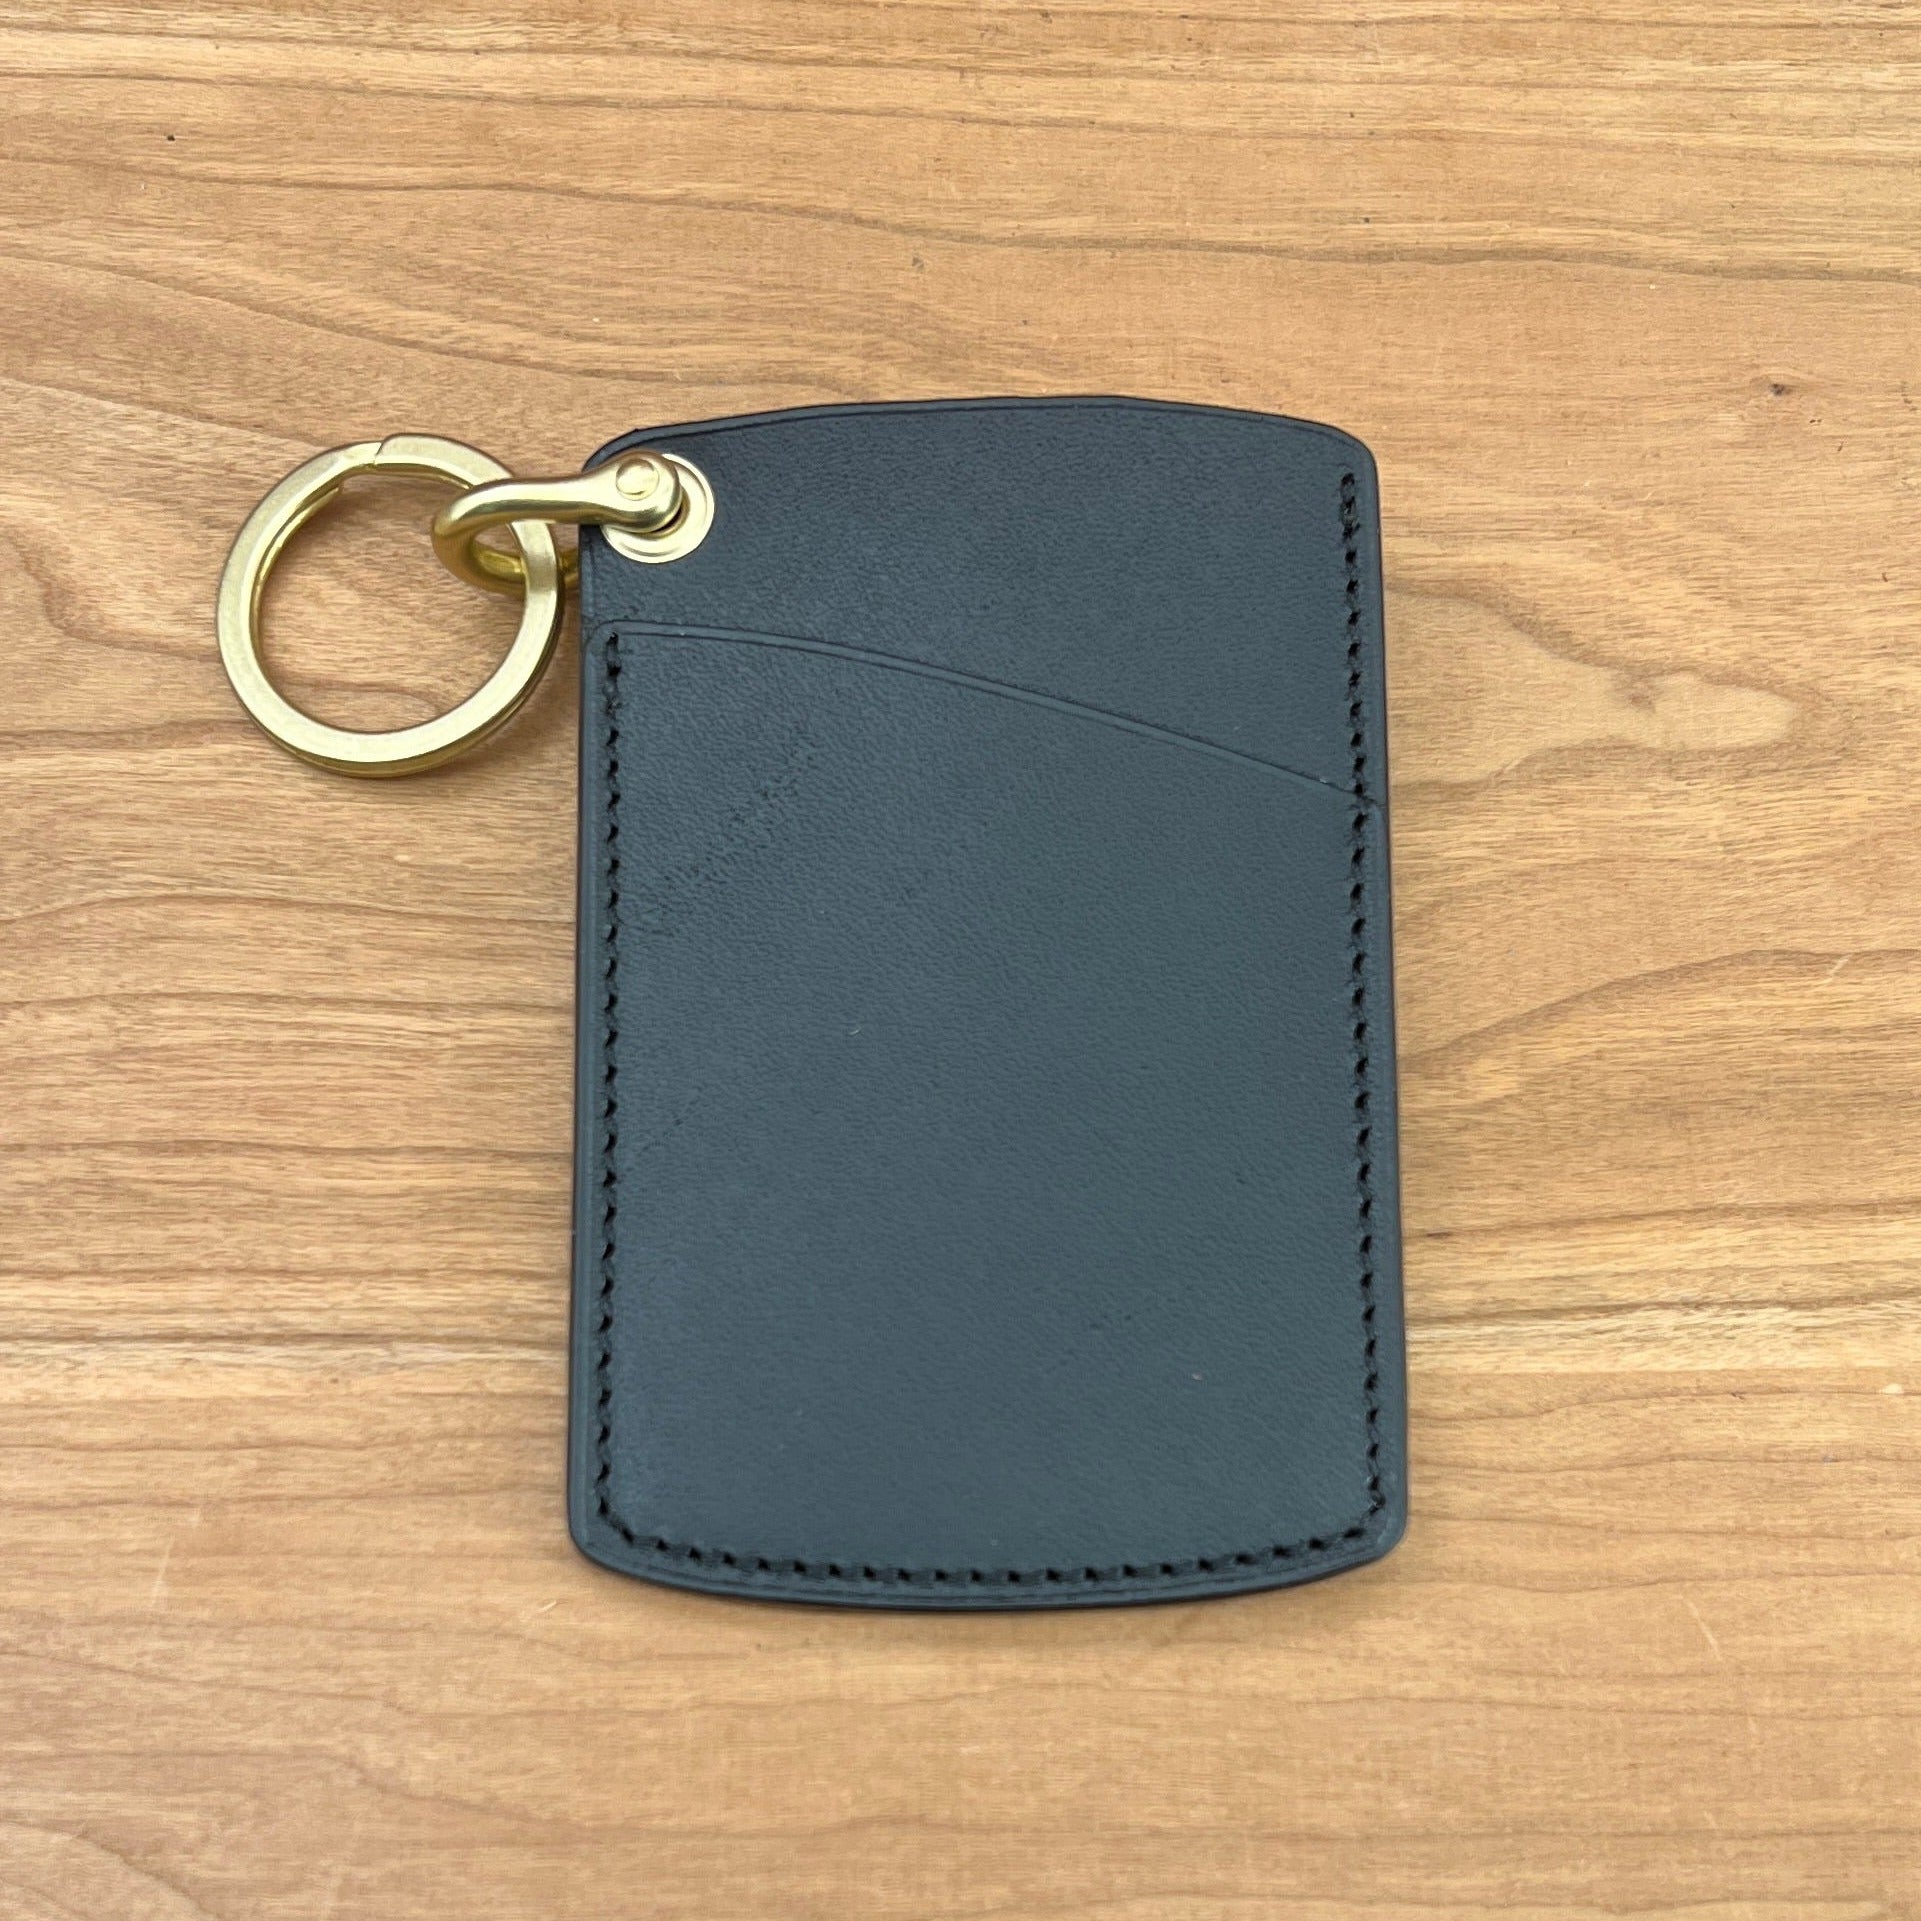 Horween Leather Credit Card Sheath